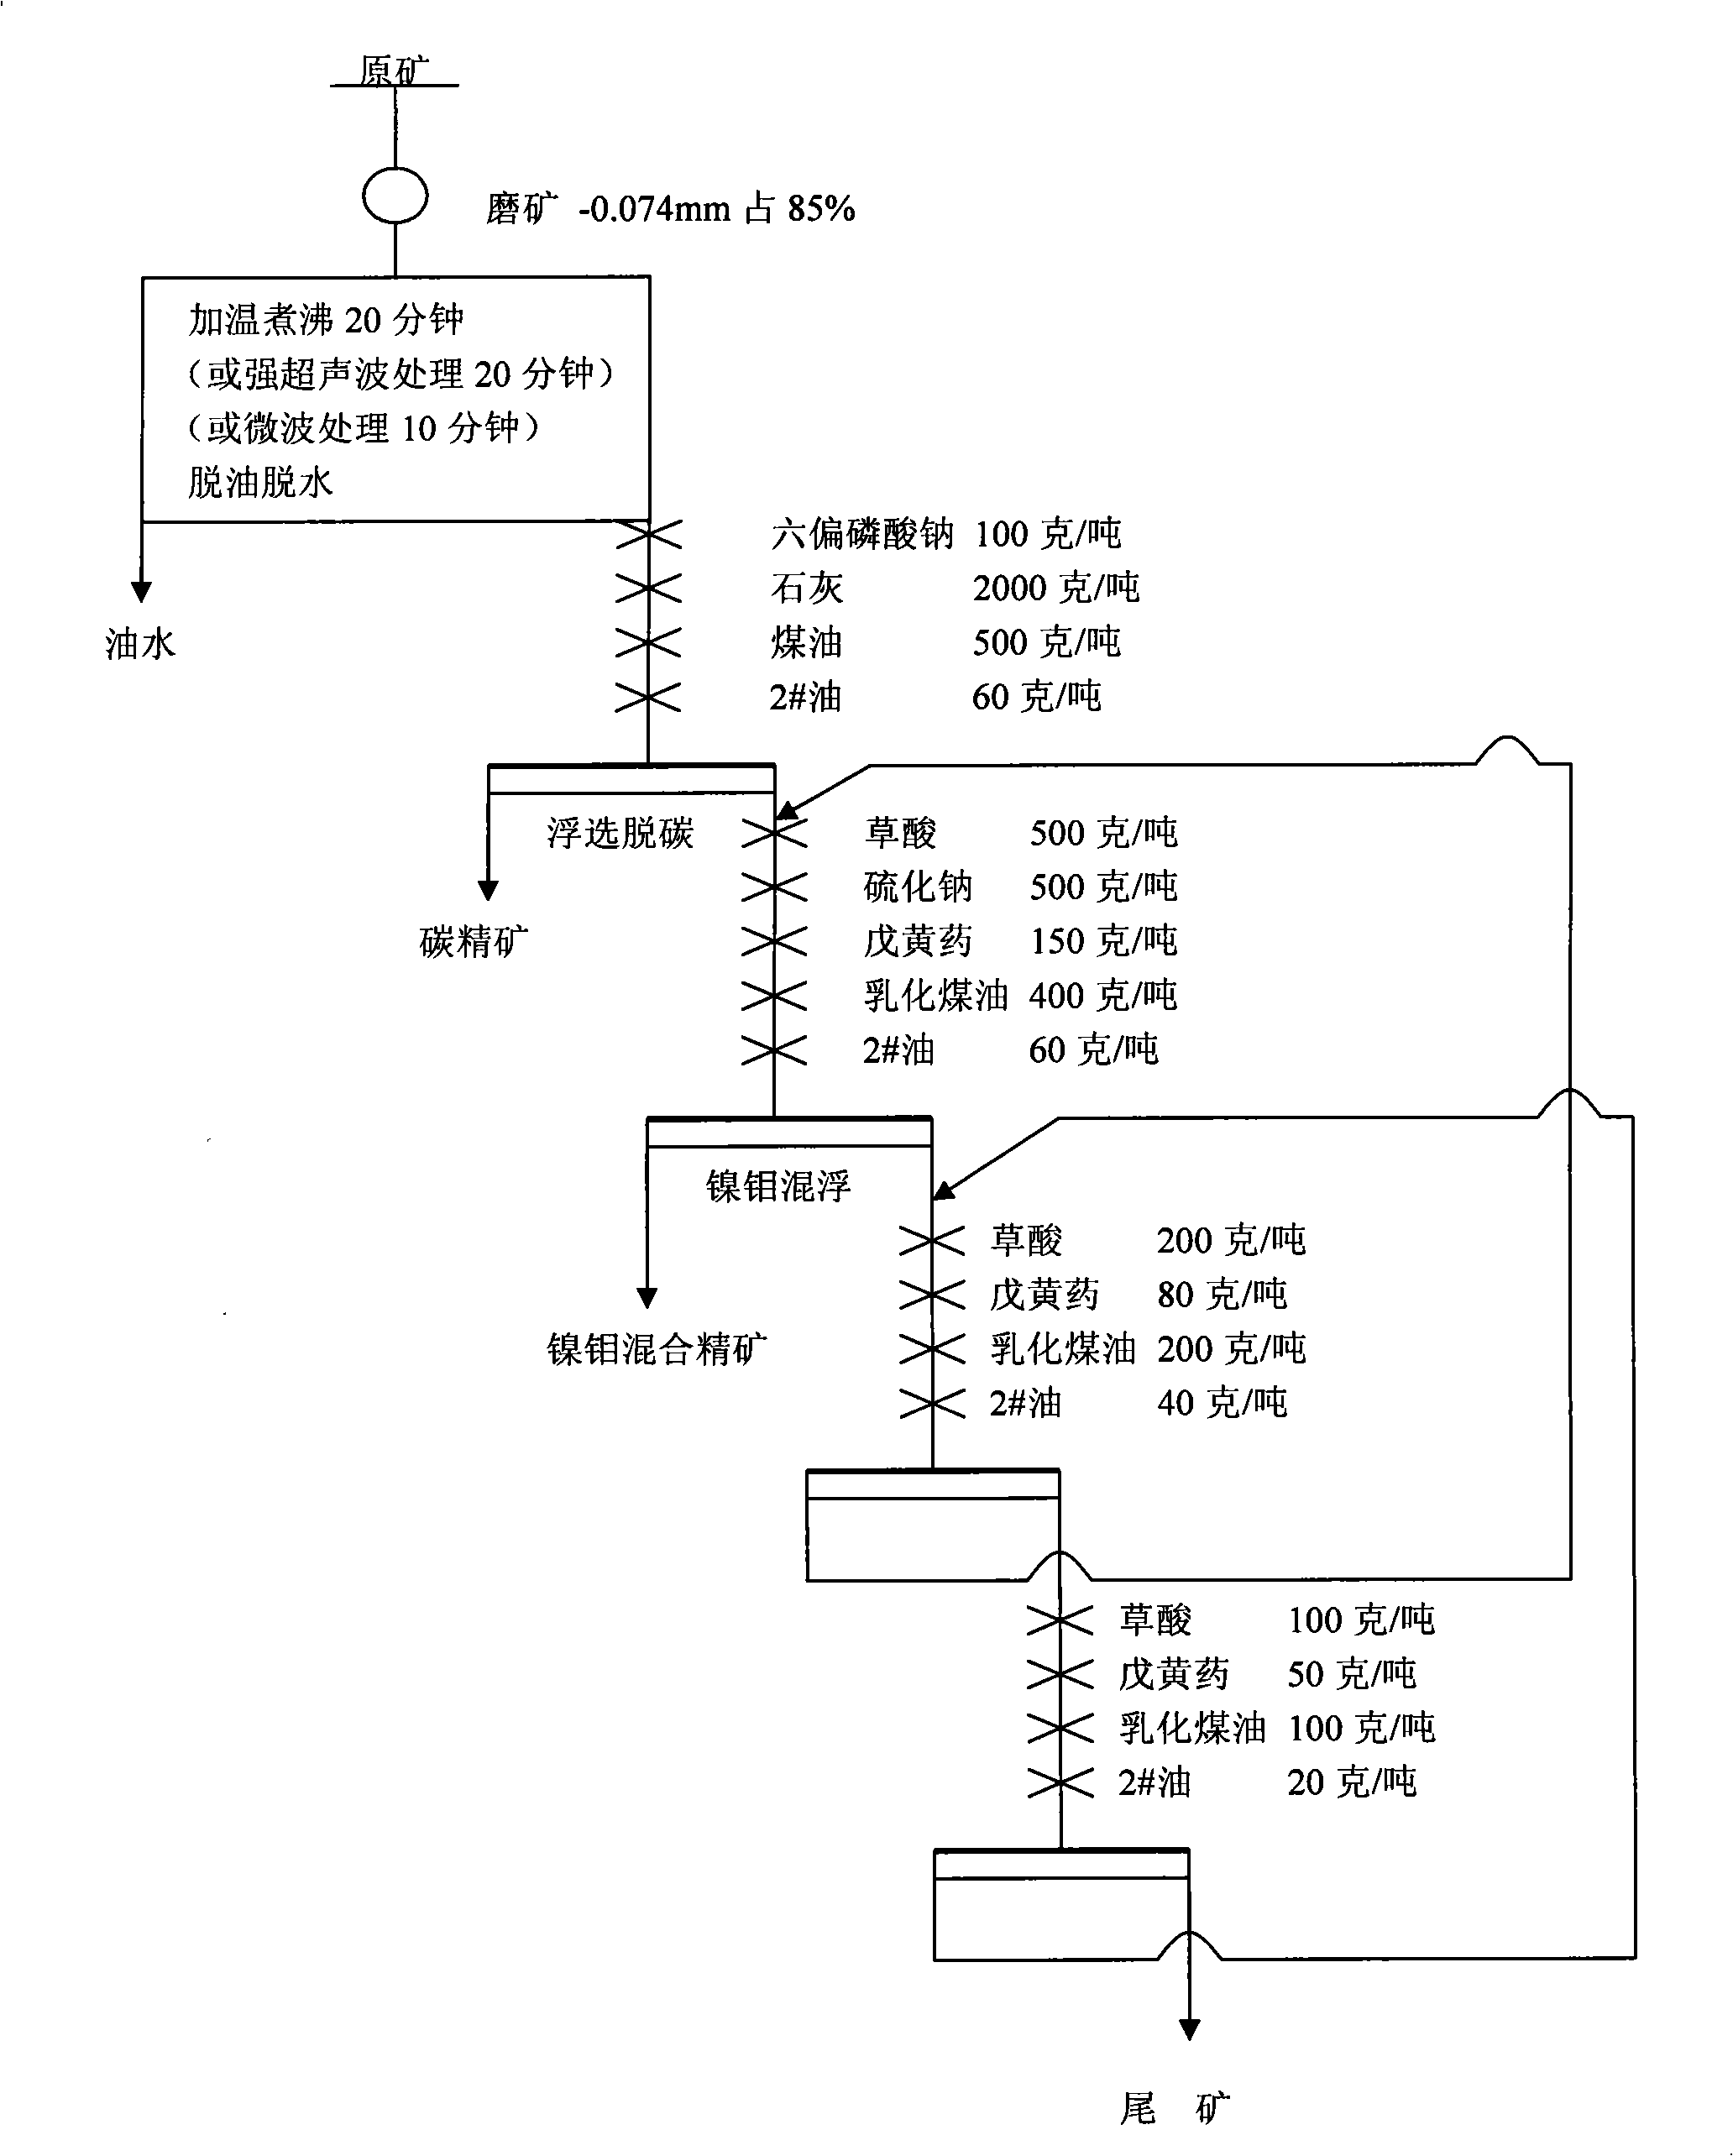 High-efficiency ore sorting technique for nickel-molybdenum mineral